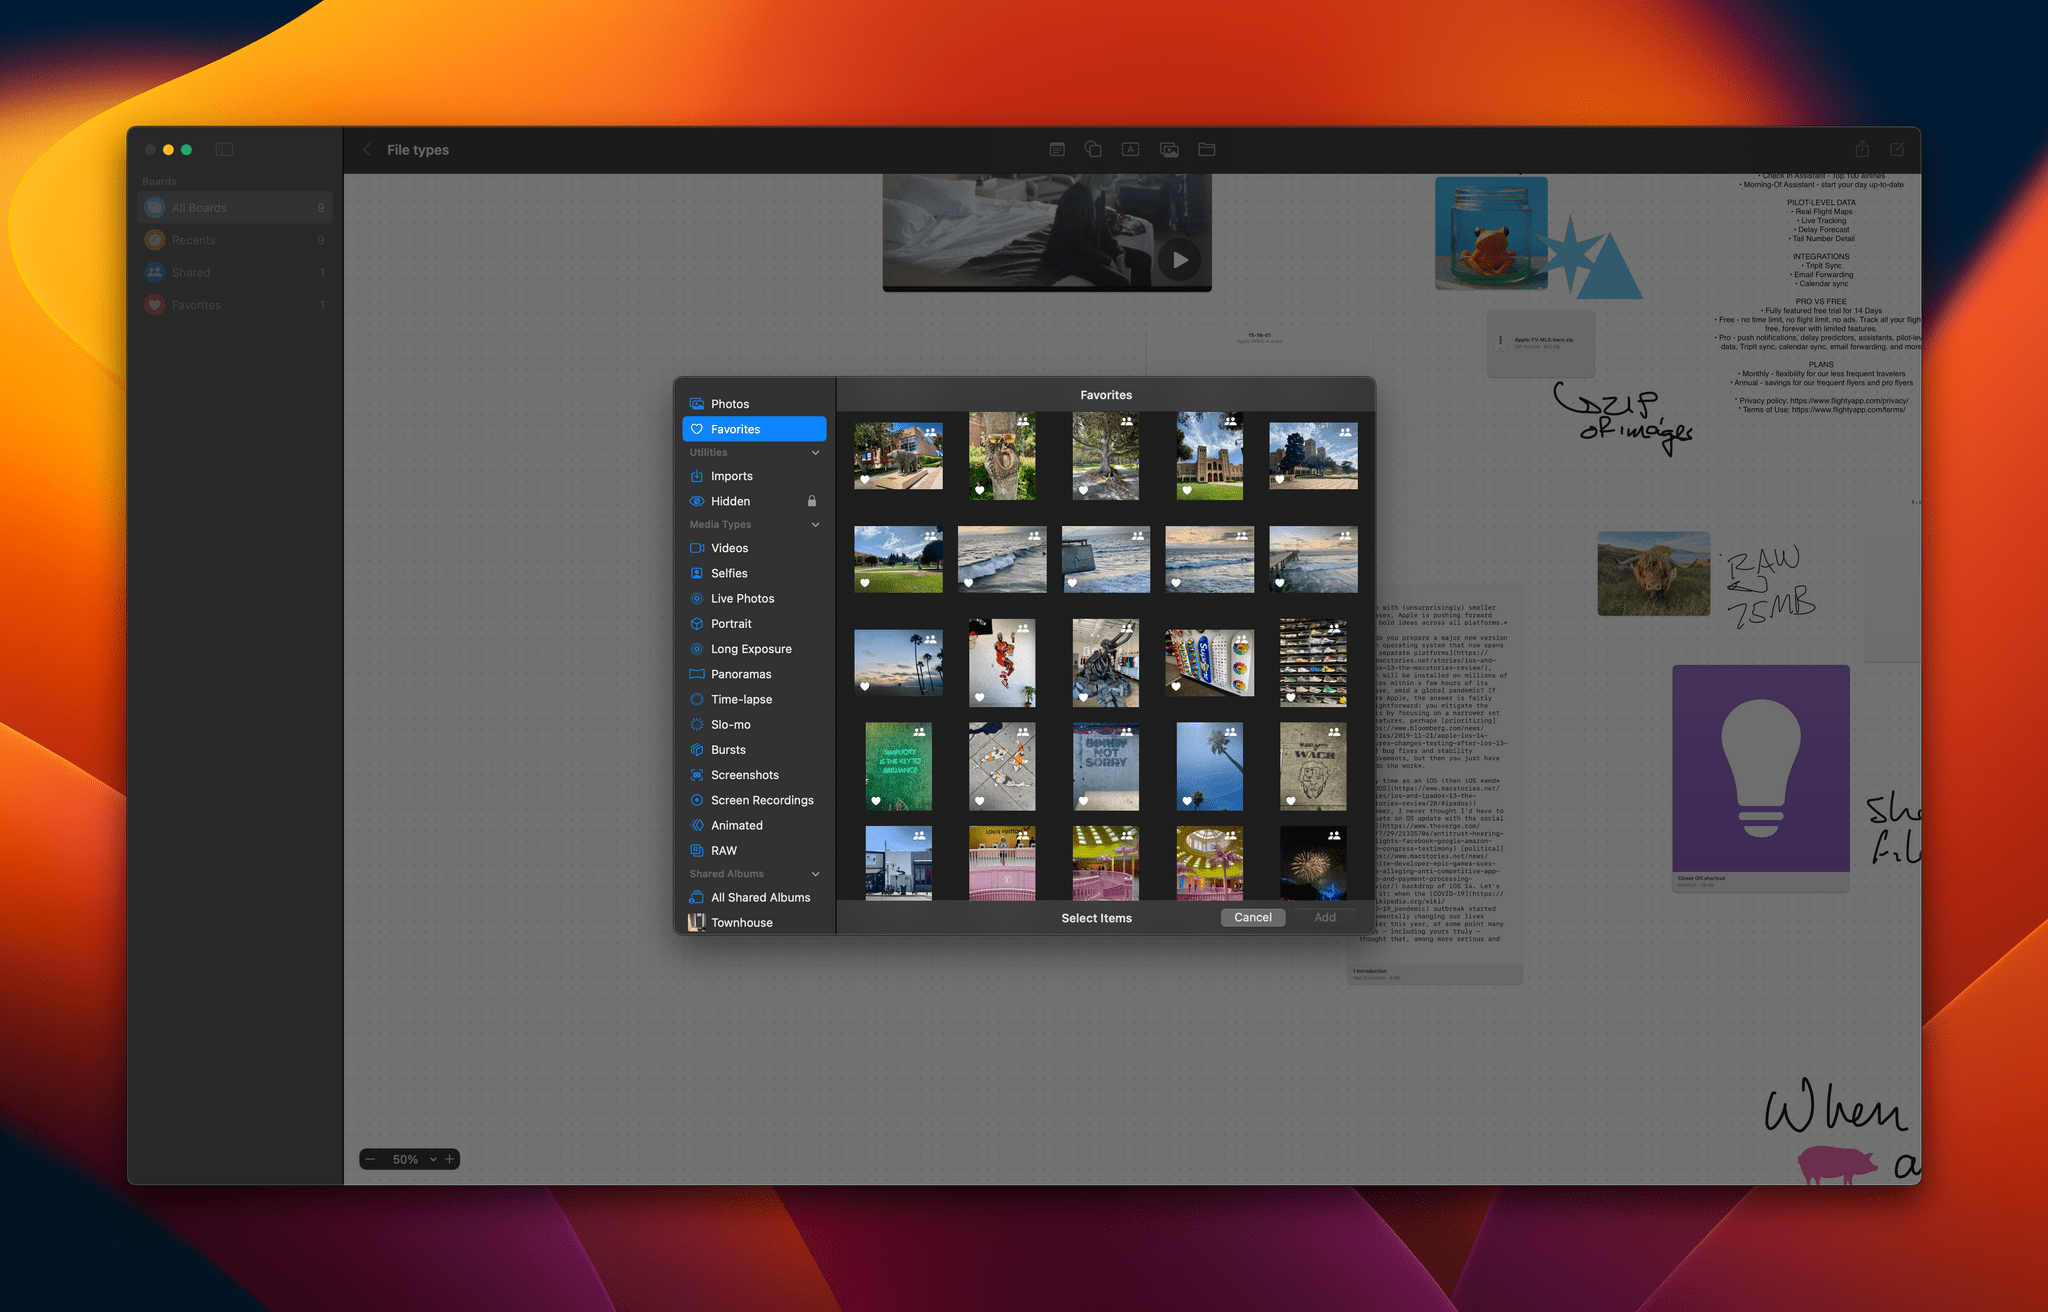 Freeform uses the new photo and video picker on the Mac.